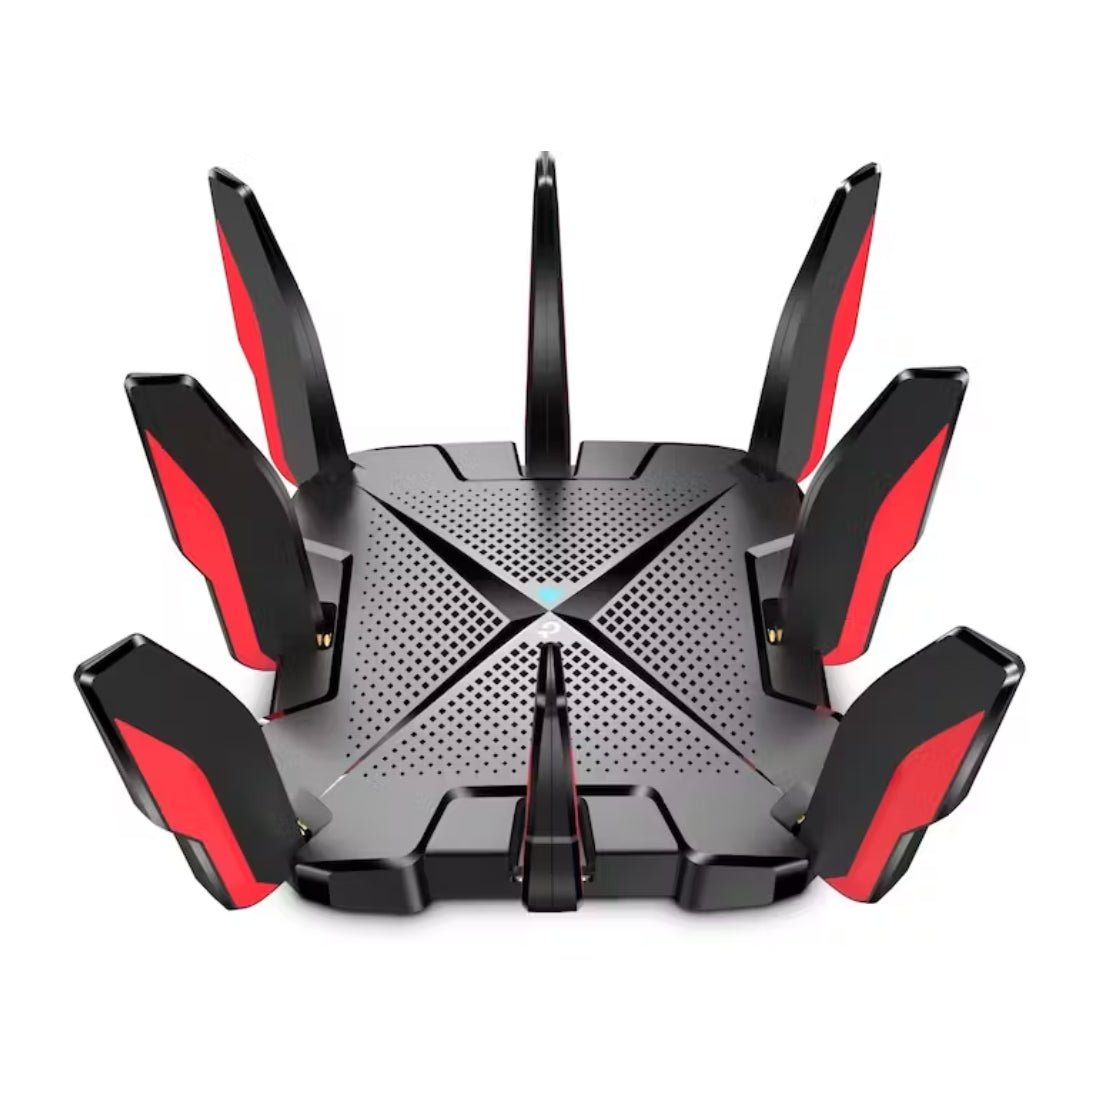 TP-Link GX90 Tri-Band WiFi 6 Gaming Router - راوتر لاسلكي - Store 974 | ستور ٩٧٤